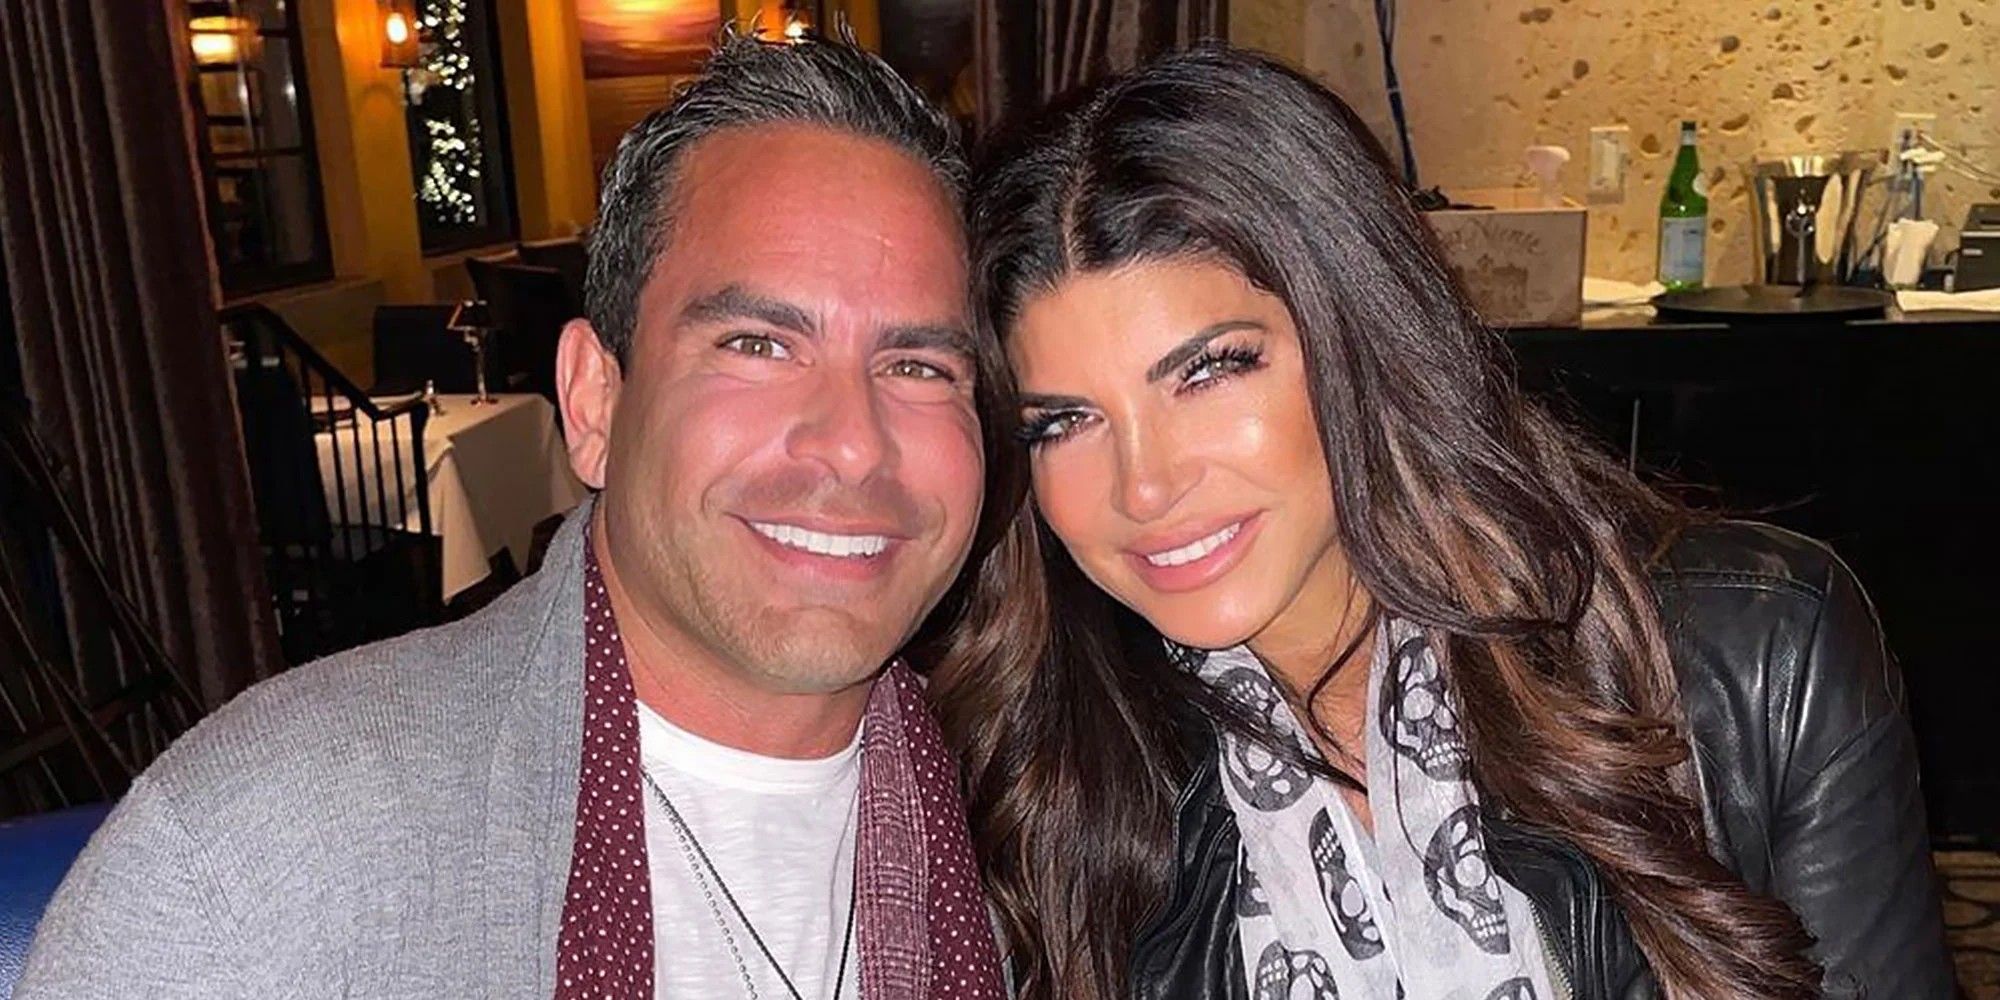 Teresa Guidice e Luis Ruelas de The Real Housewives of New Jersey